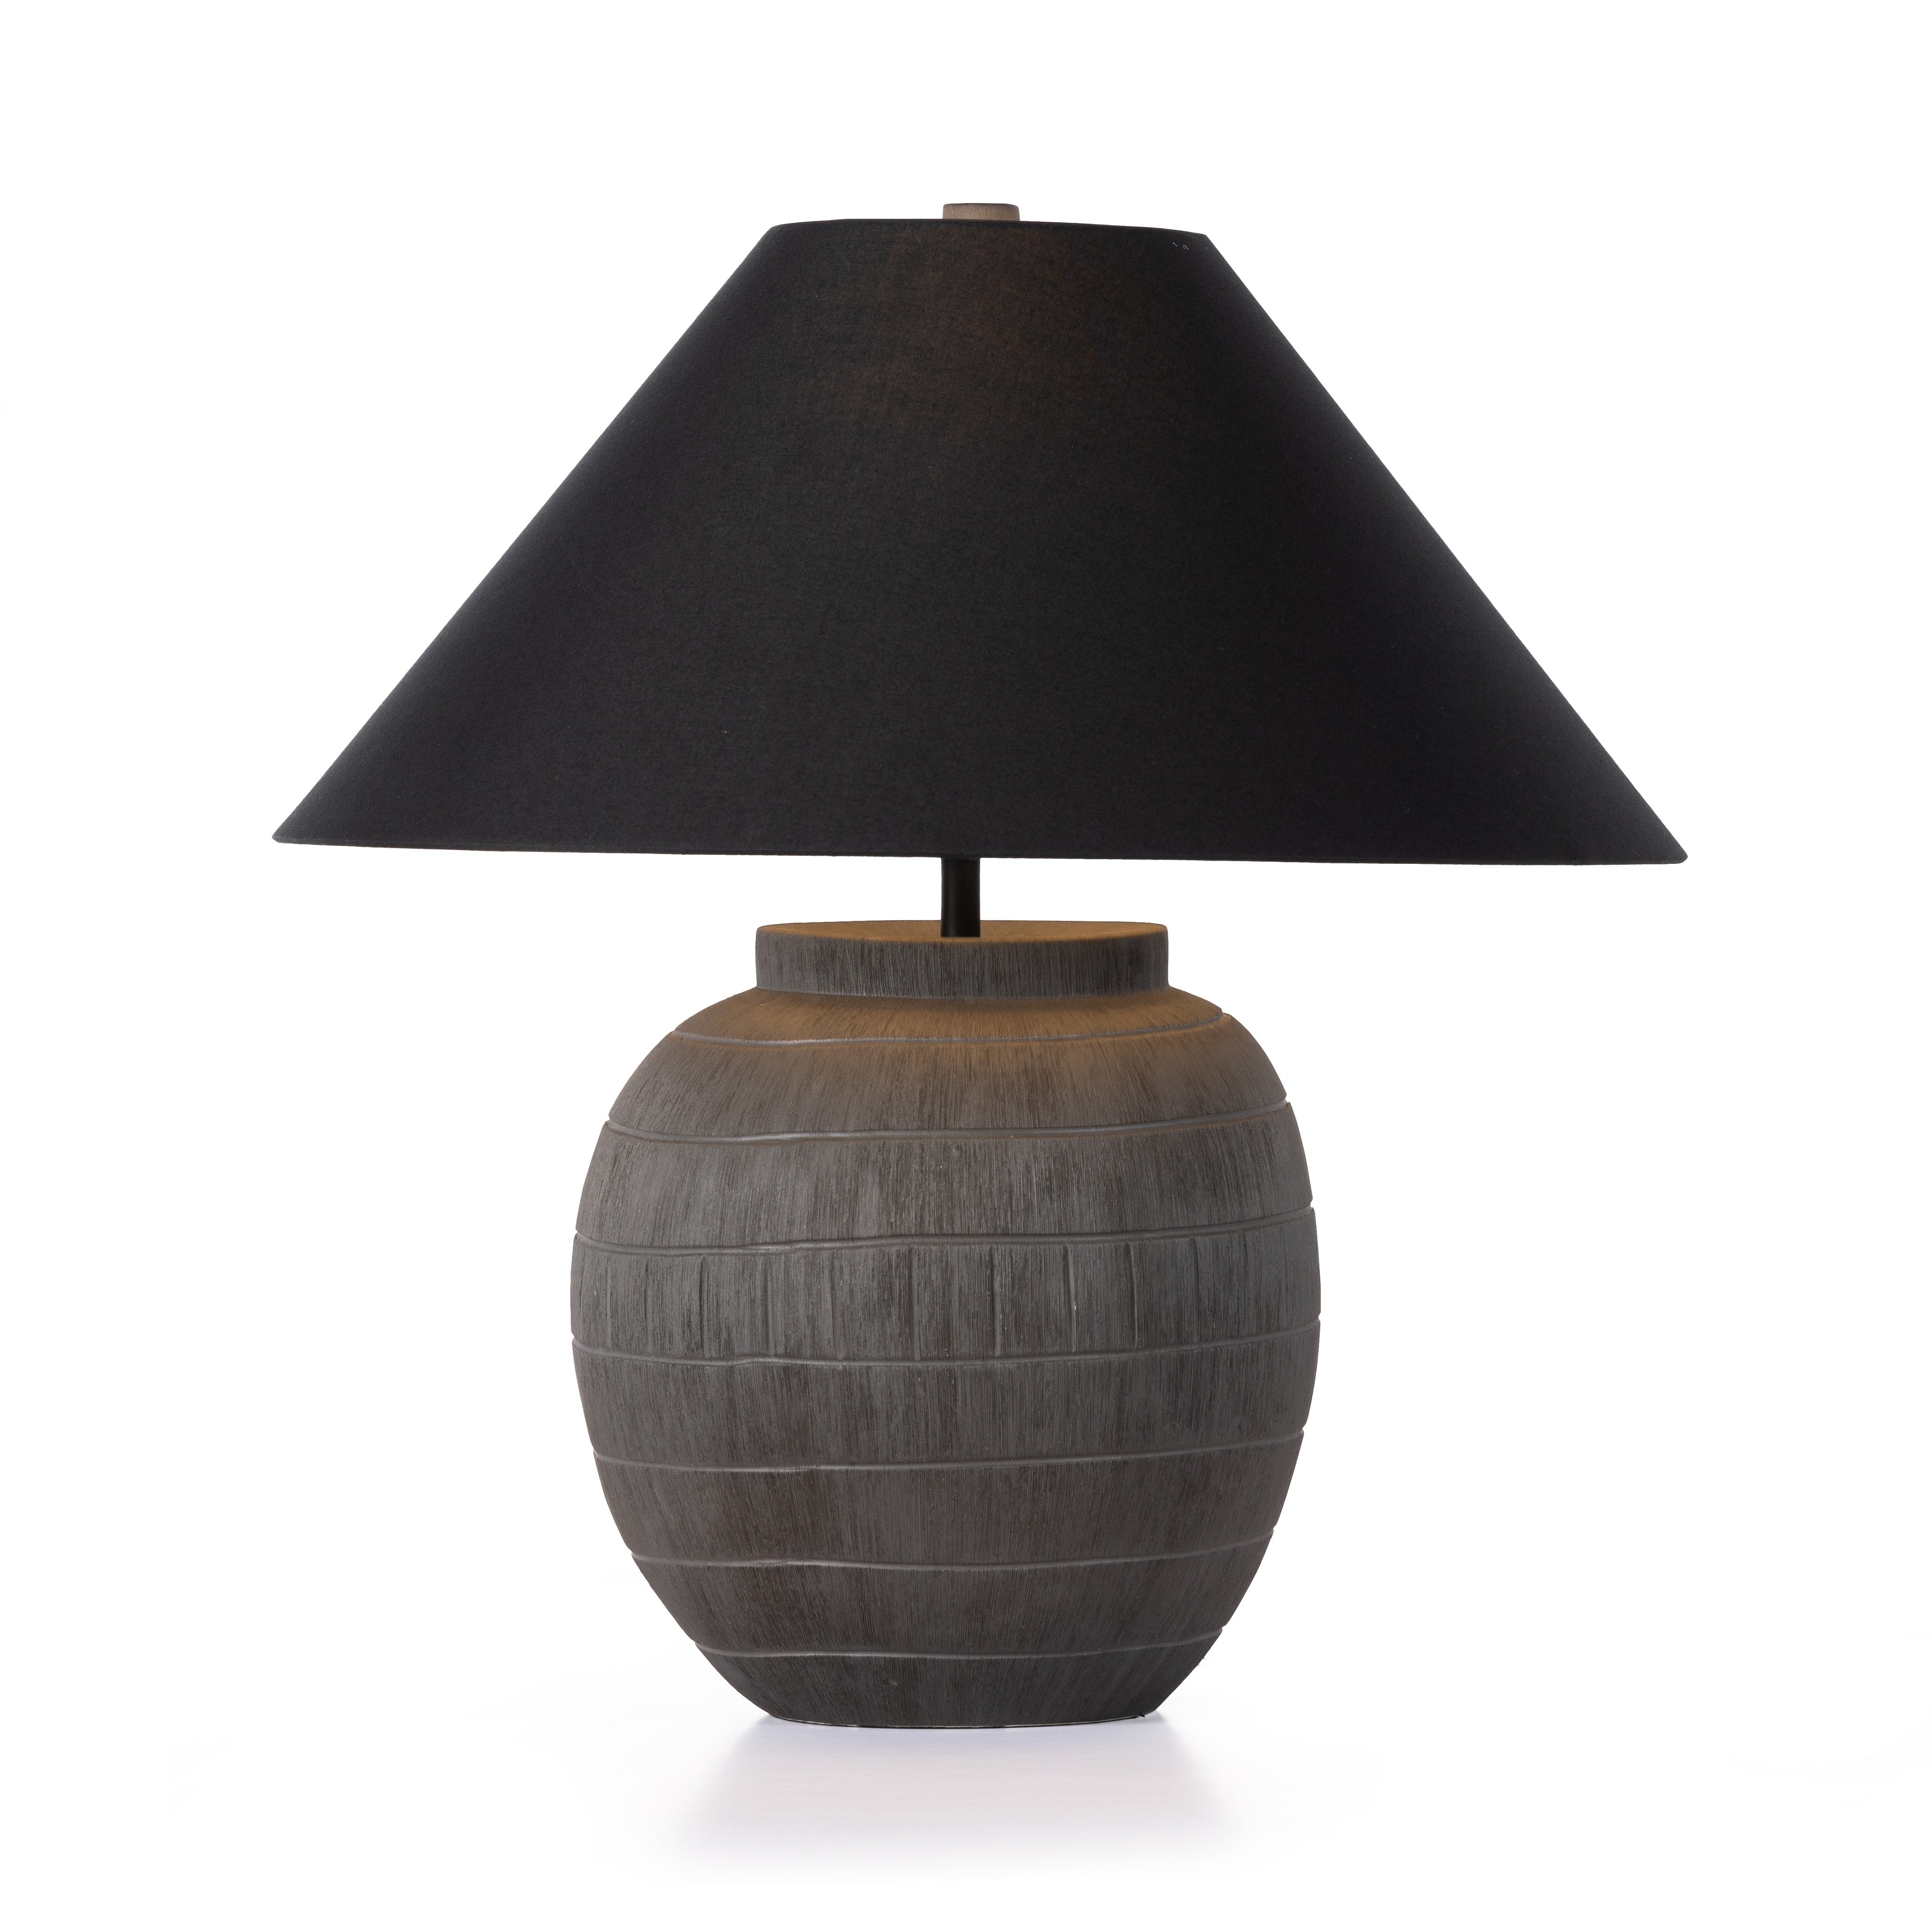 Muji Black Cotton Table Lamp is a hand-shaped black talavera lamp with handle-like detailing pairs with a tapered cotton shade in black. Amethyst Home provides interior design services, furniture, rugs, and lighting in the Calabasas metro area.